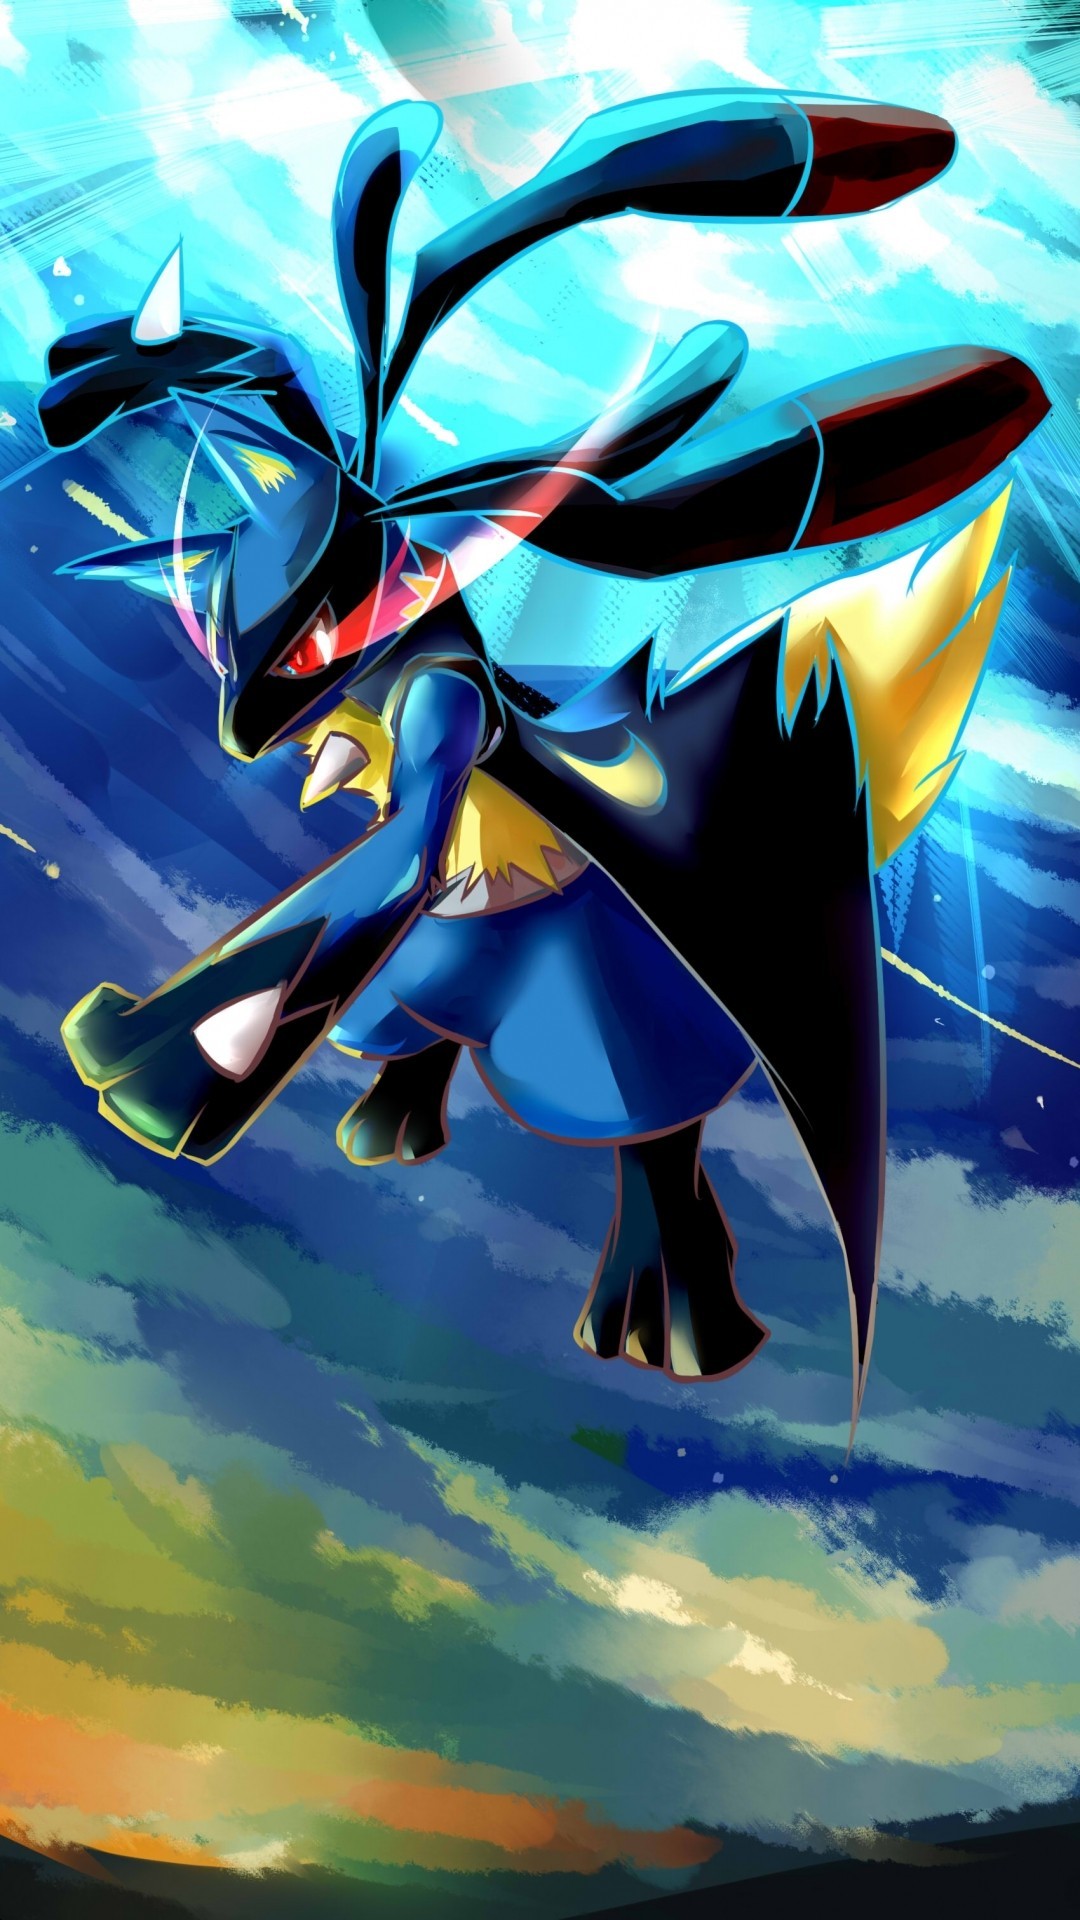 1080x1920 Pokemon Lucario Backgrounds Download Free Unique Cool Pokemon Wallpapers  iPhone Of Pokemon Lucario Backgrounds Download Free